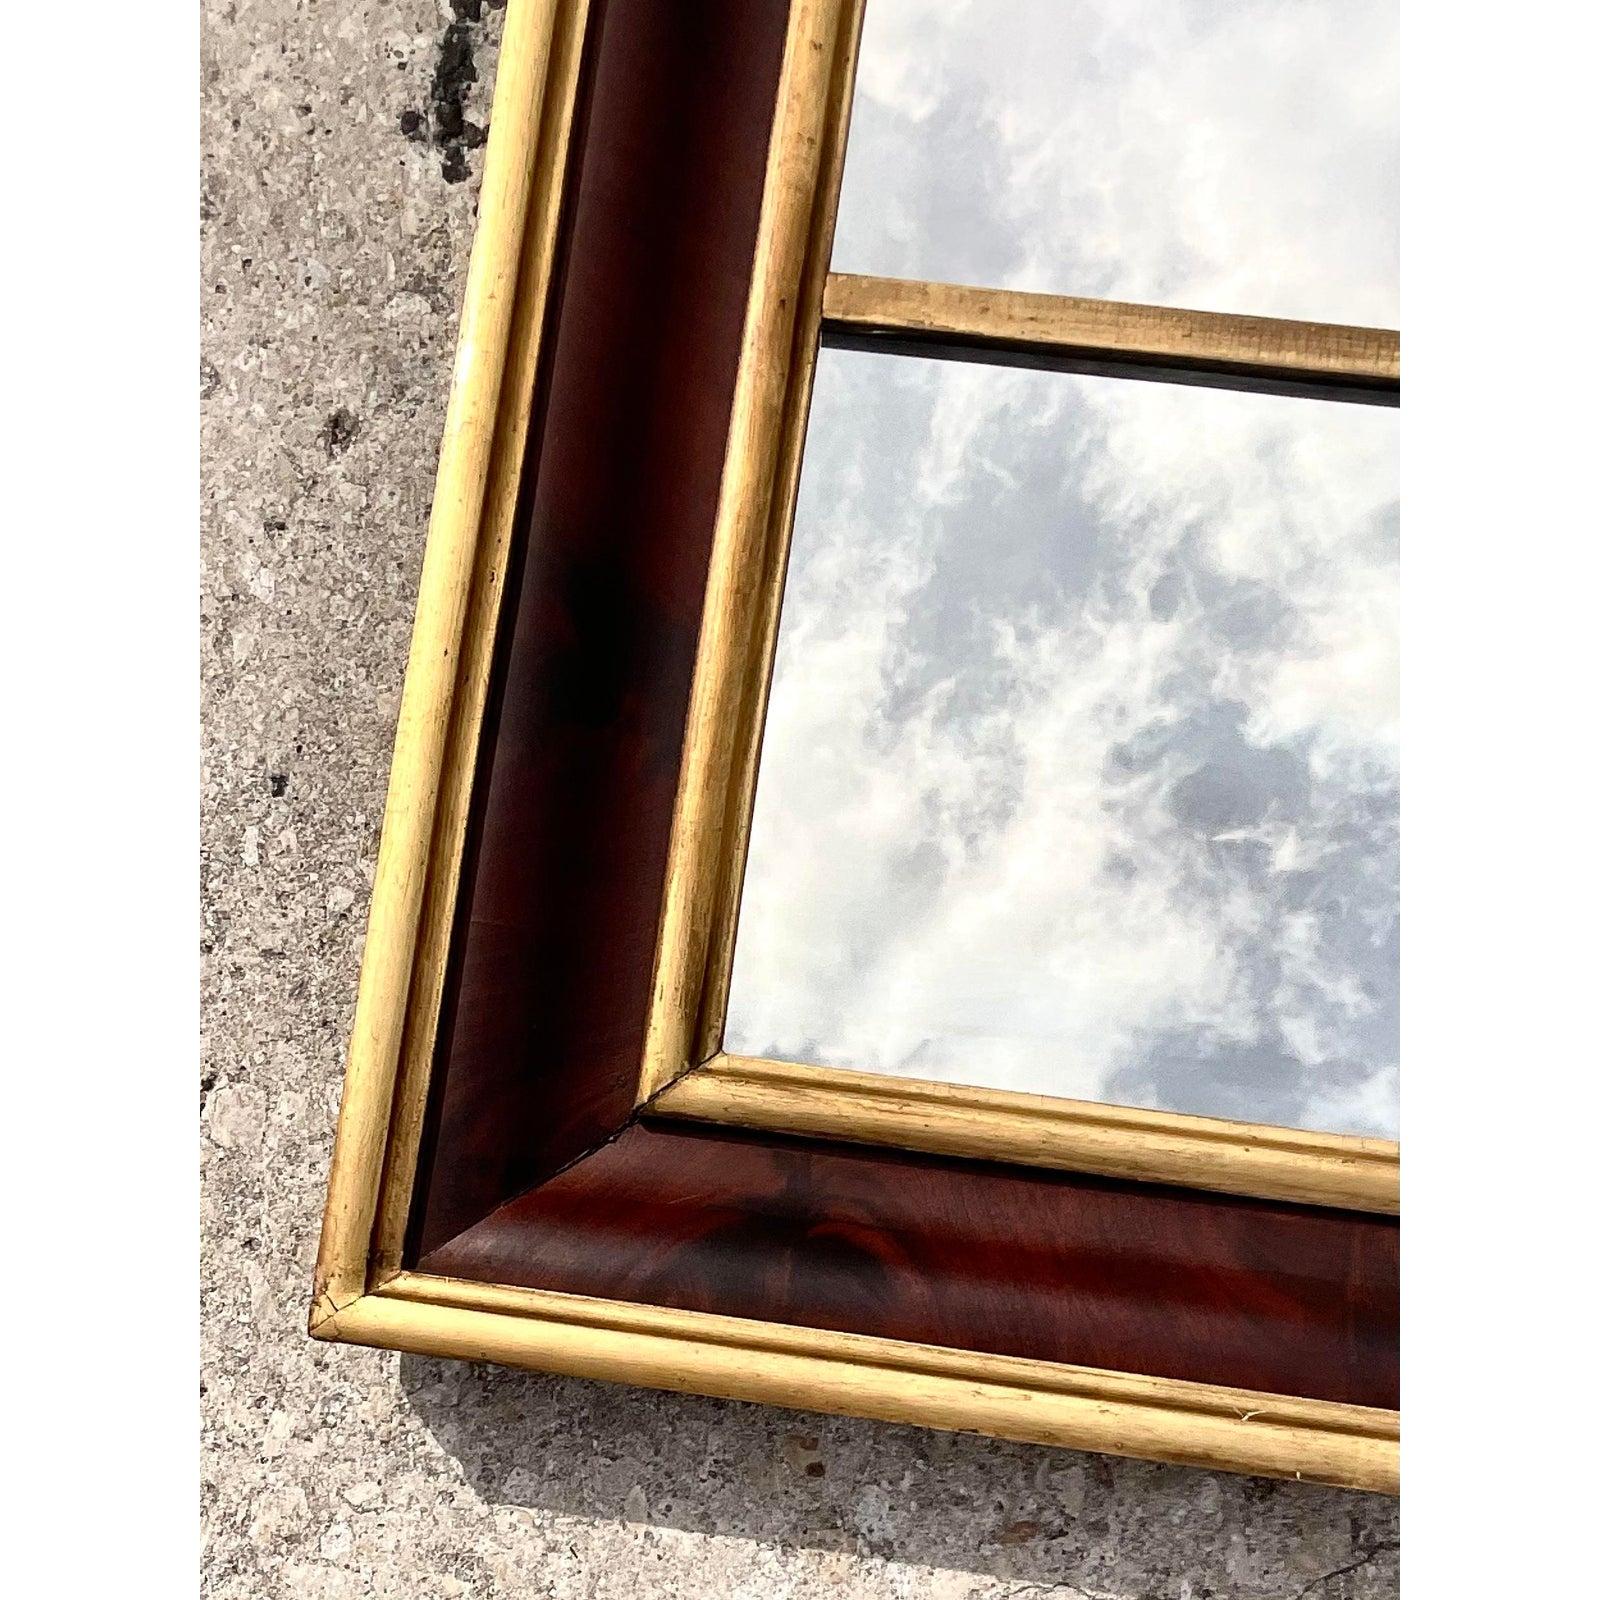 Stunning vintage Mahogany flame wall mirror. Beautiful Burl wood detail with chic gilt touches. This mirror has some serious age to it, but in great shape. A classic addition to any décor.